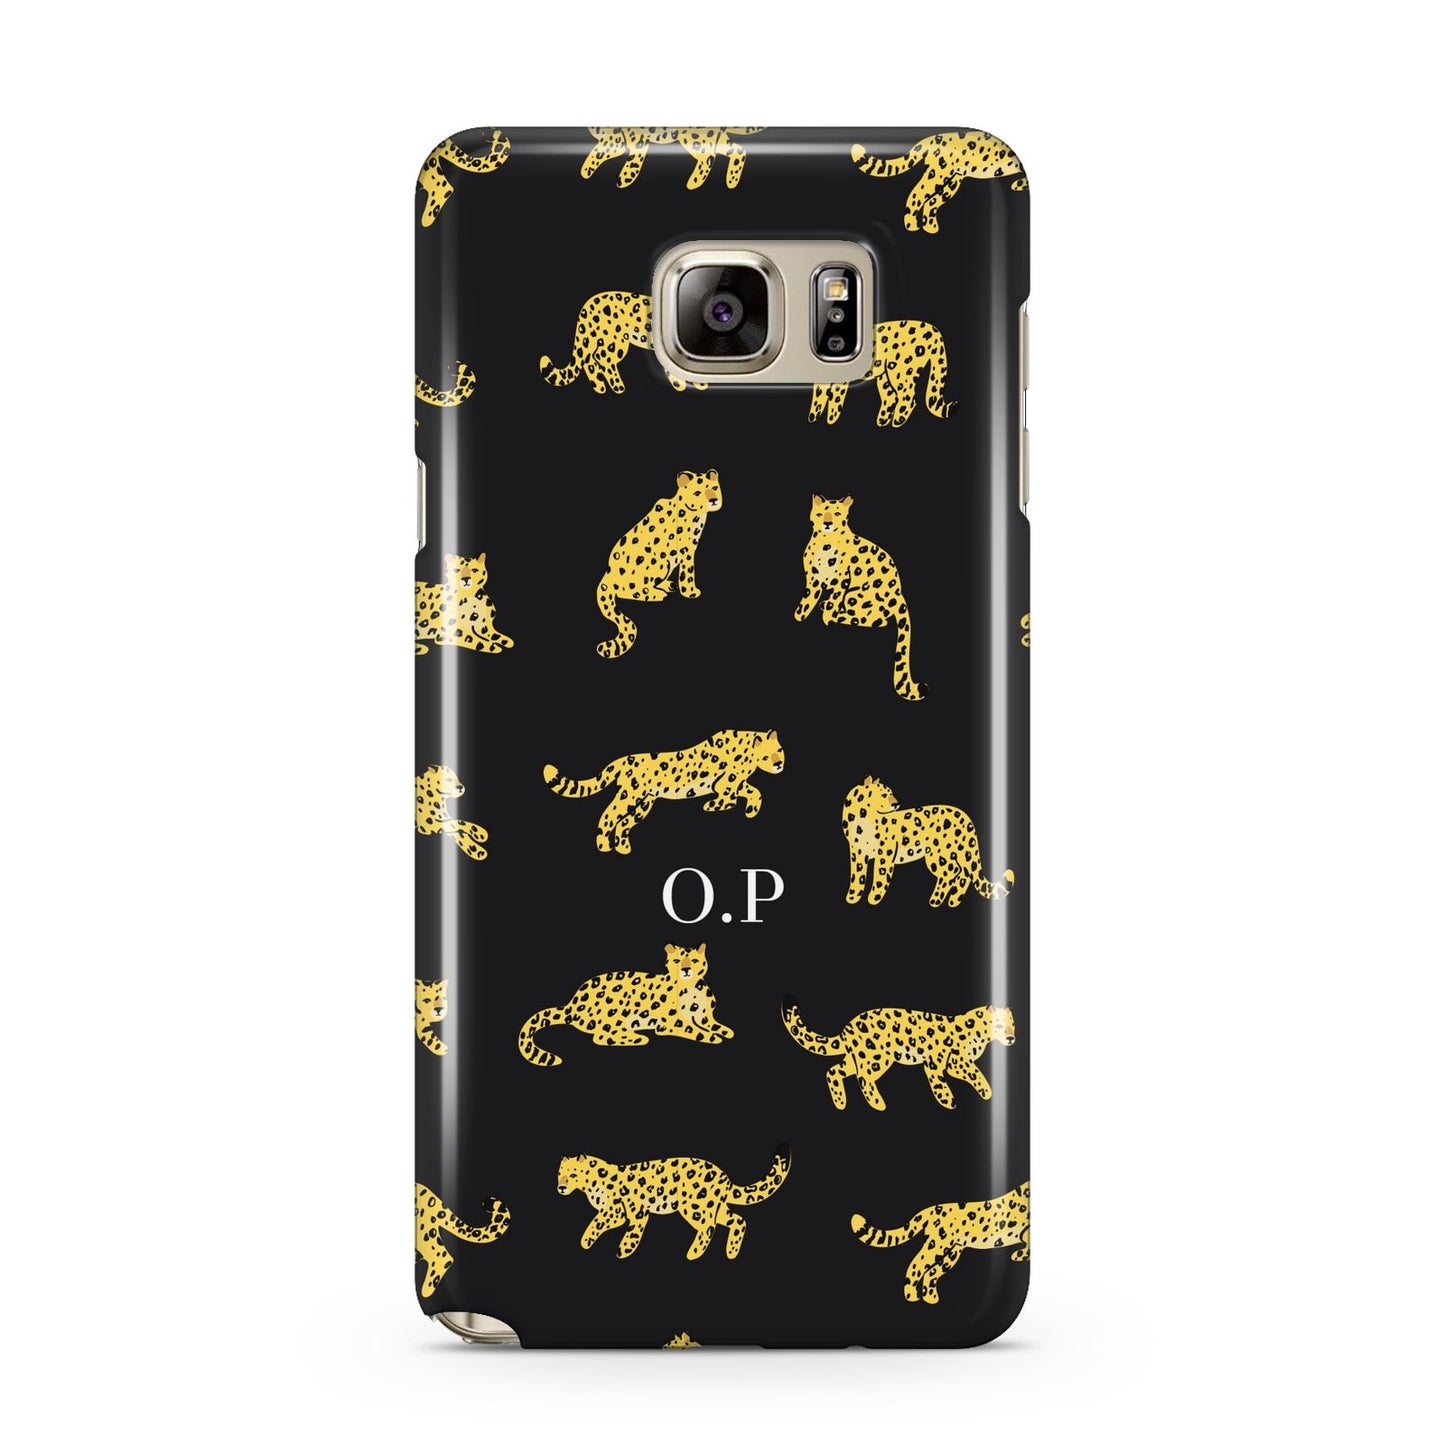 Prowling Leopard Samsung Galaxy Note 5 Case